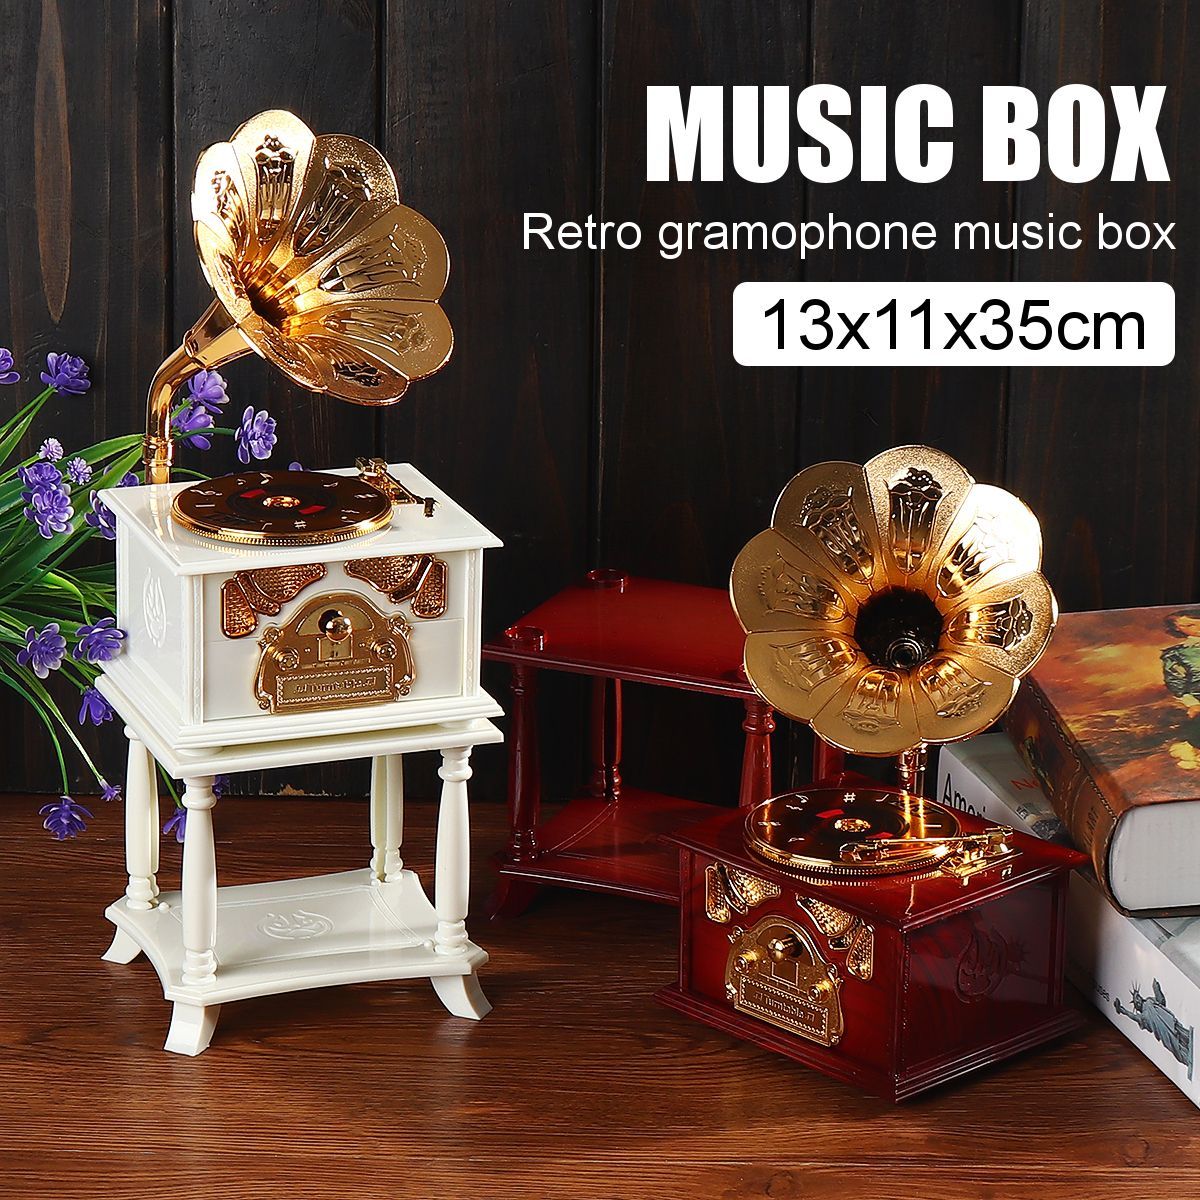 Vintage-Phonograph-Music-Box-Crafts-Simulation-Home-Ornaments-Gift-Bedroom-Decor-1630530